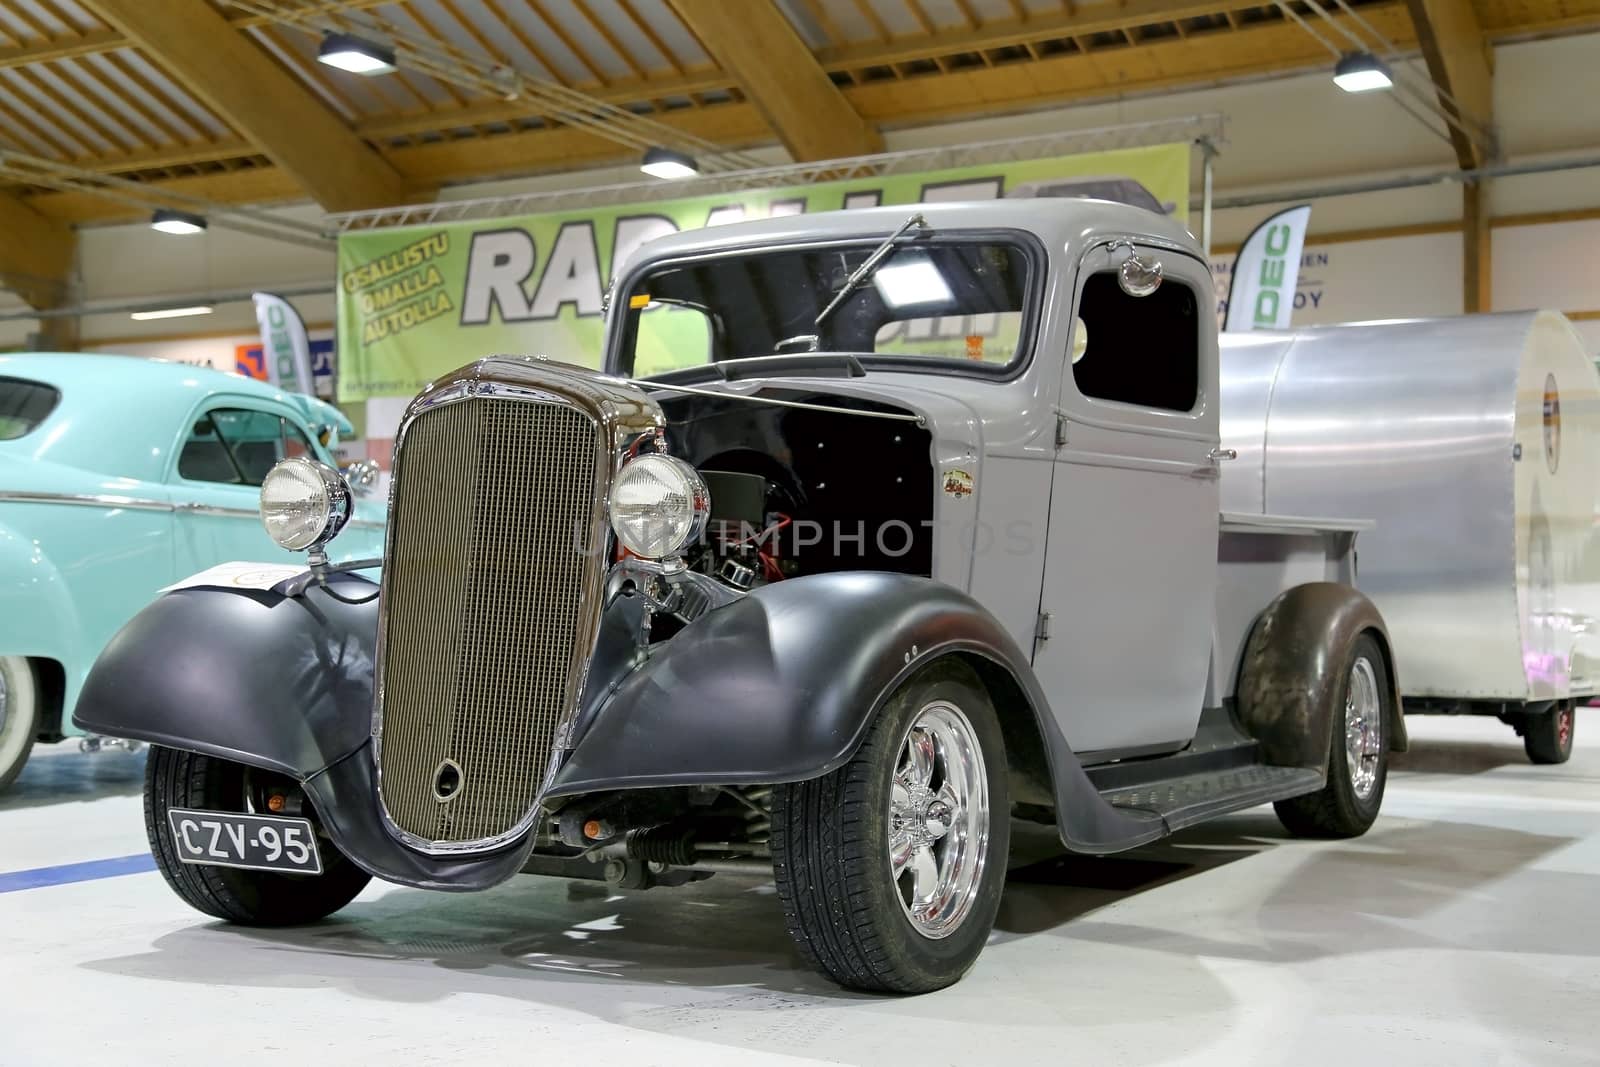 Chevrolet Pickup 1936 Vintage Car in a Show by Tainas